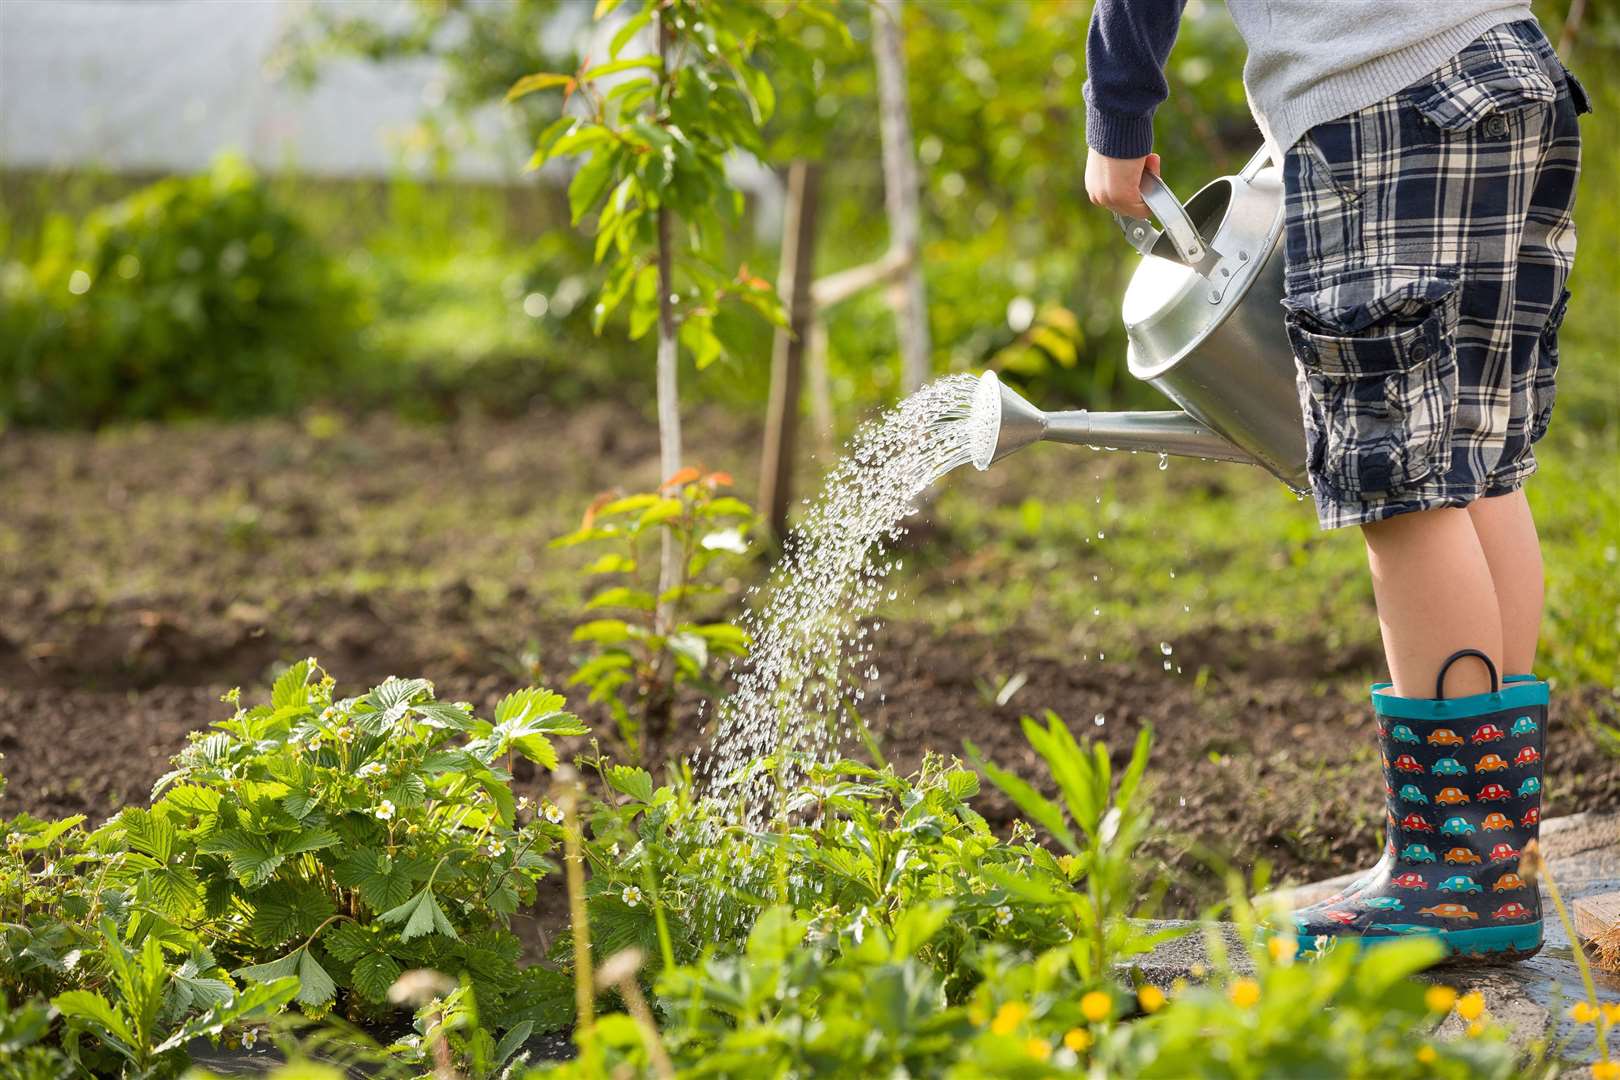 Get the kids into the garden for some fresh air and tackle some gardening together